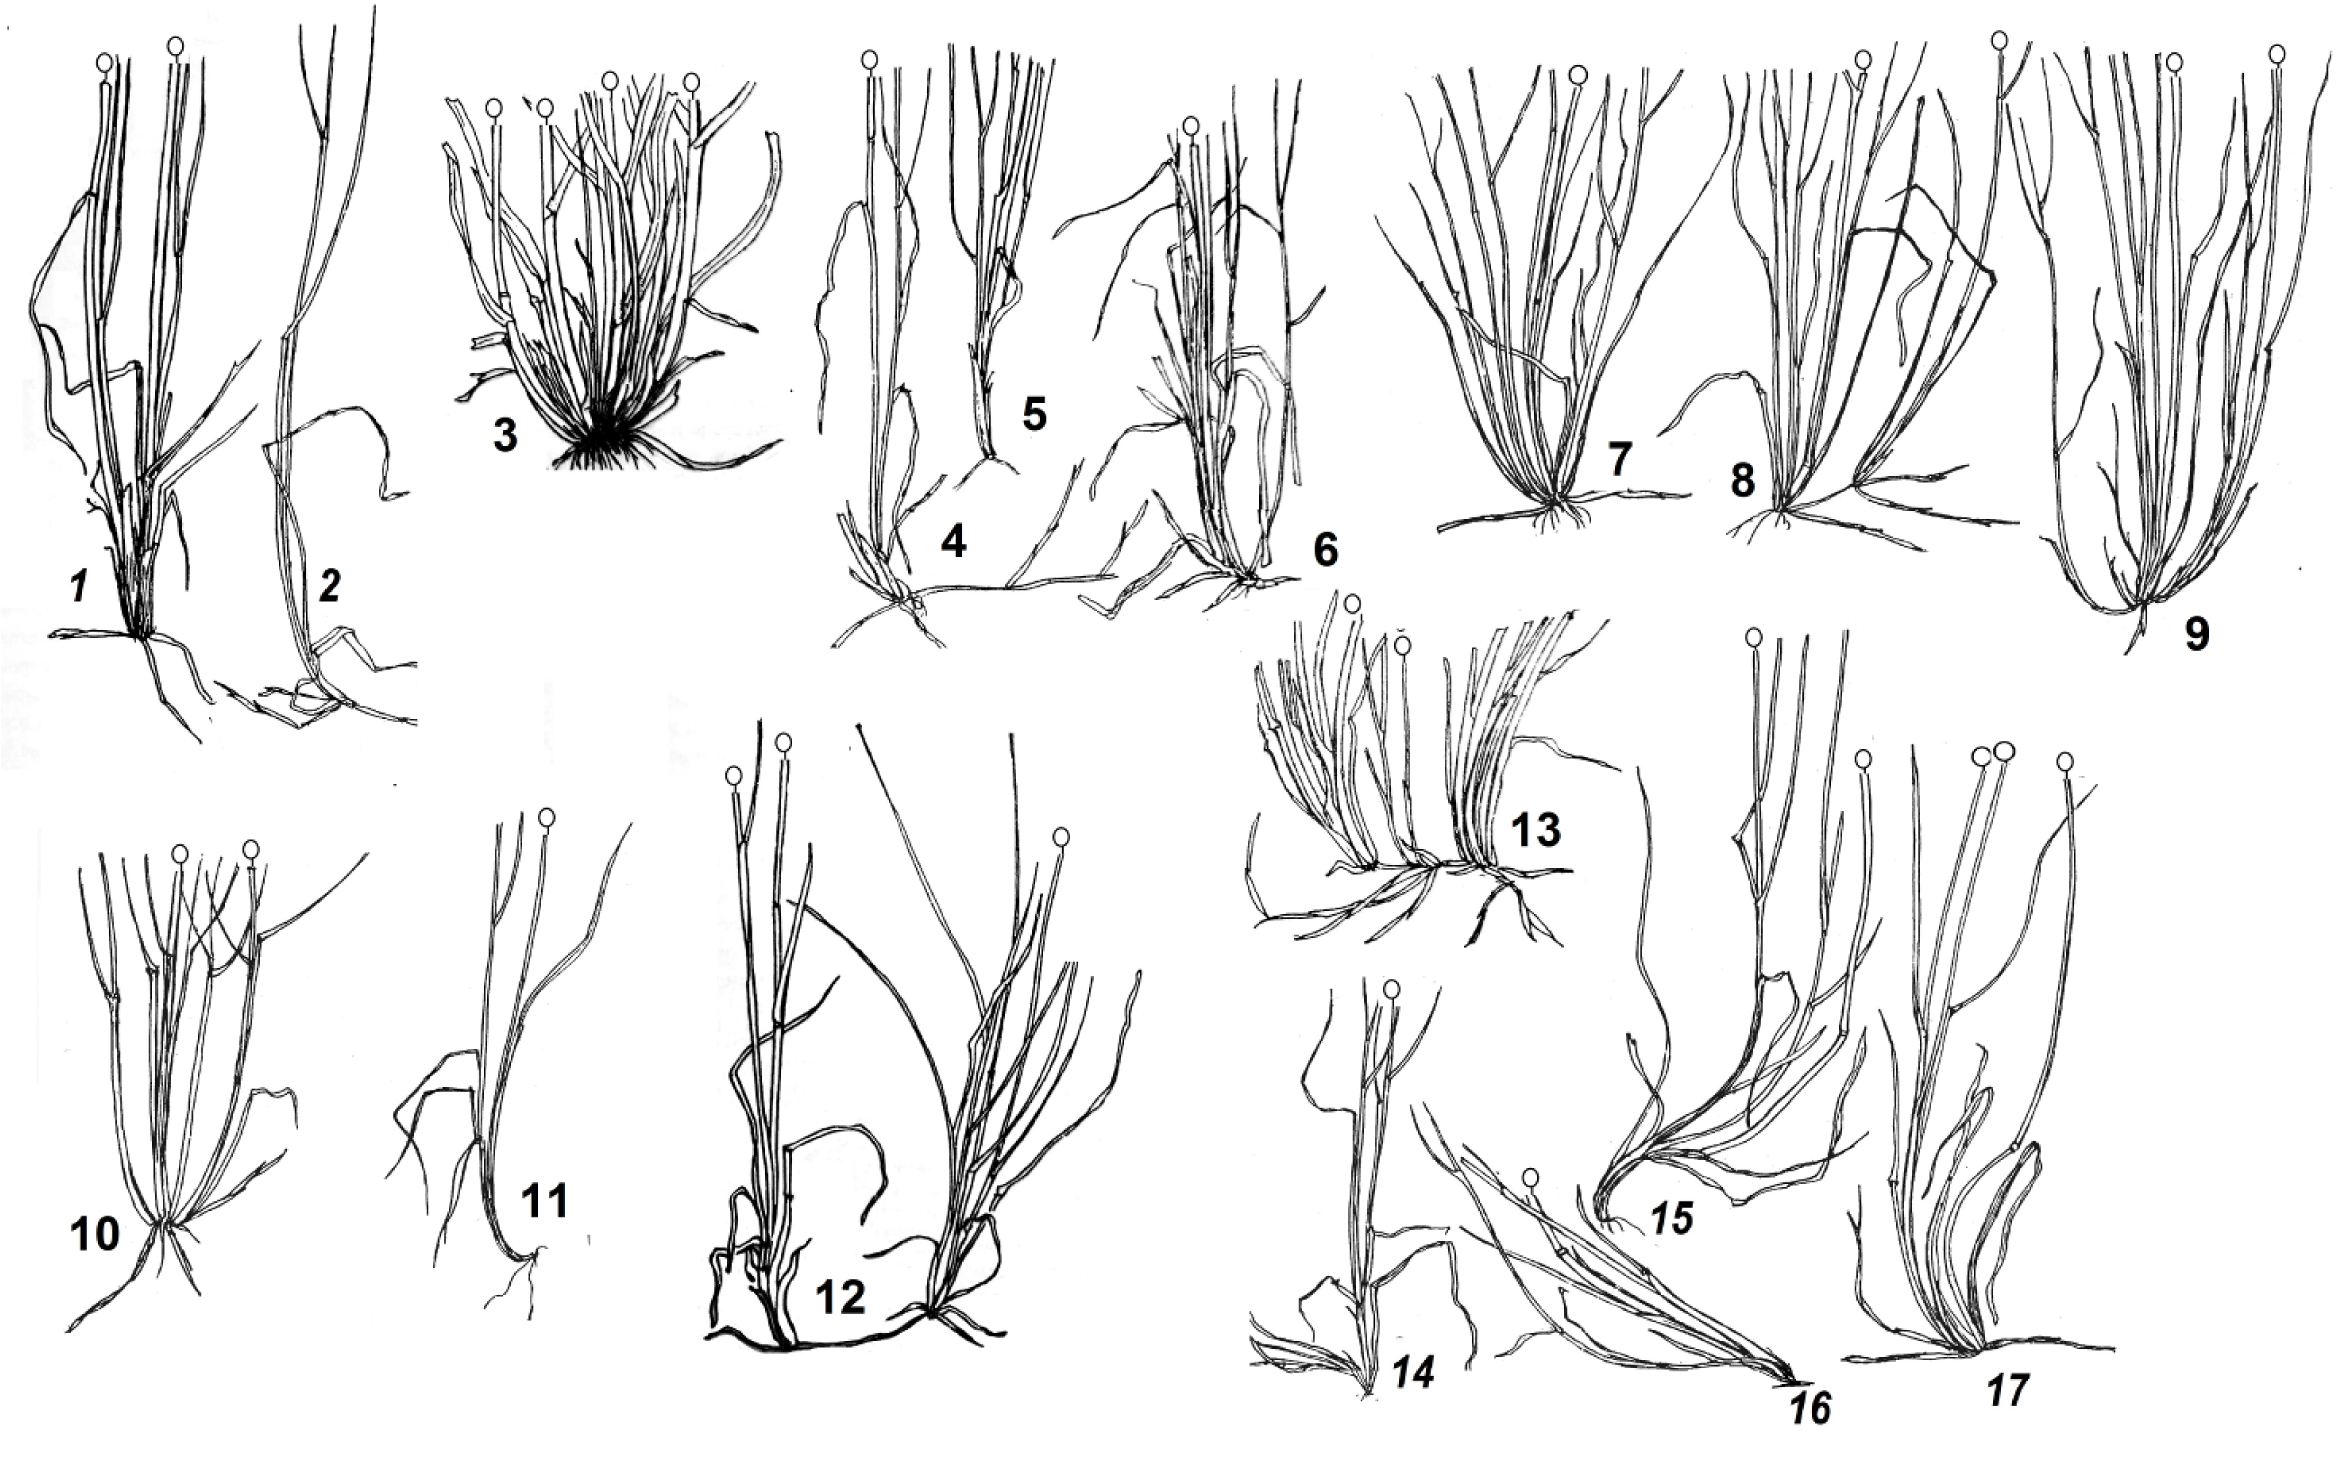 Fig. 1. Tillering of Poa pratensis s.l. in different communities in Tomsk region: 1-3 – miscellaneous herbs lawn; 4-6 – wet edge of pine forest; 7-11 –birch forest with miscellaneous herbs; 12 – sandy crest; 13 – lakeshore; 14-17 – upland meadow with miscellaneous herbs.